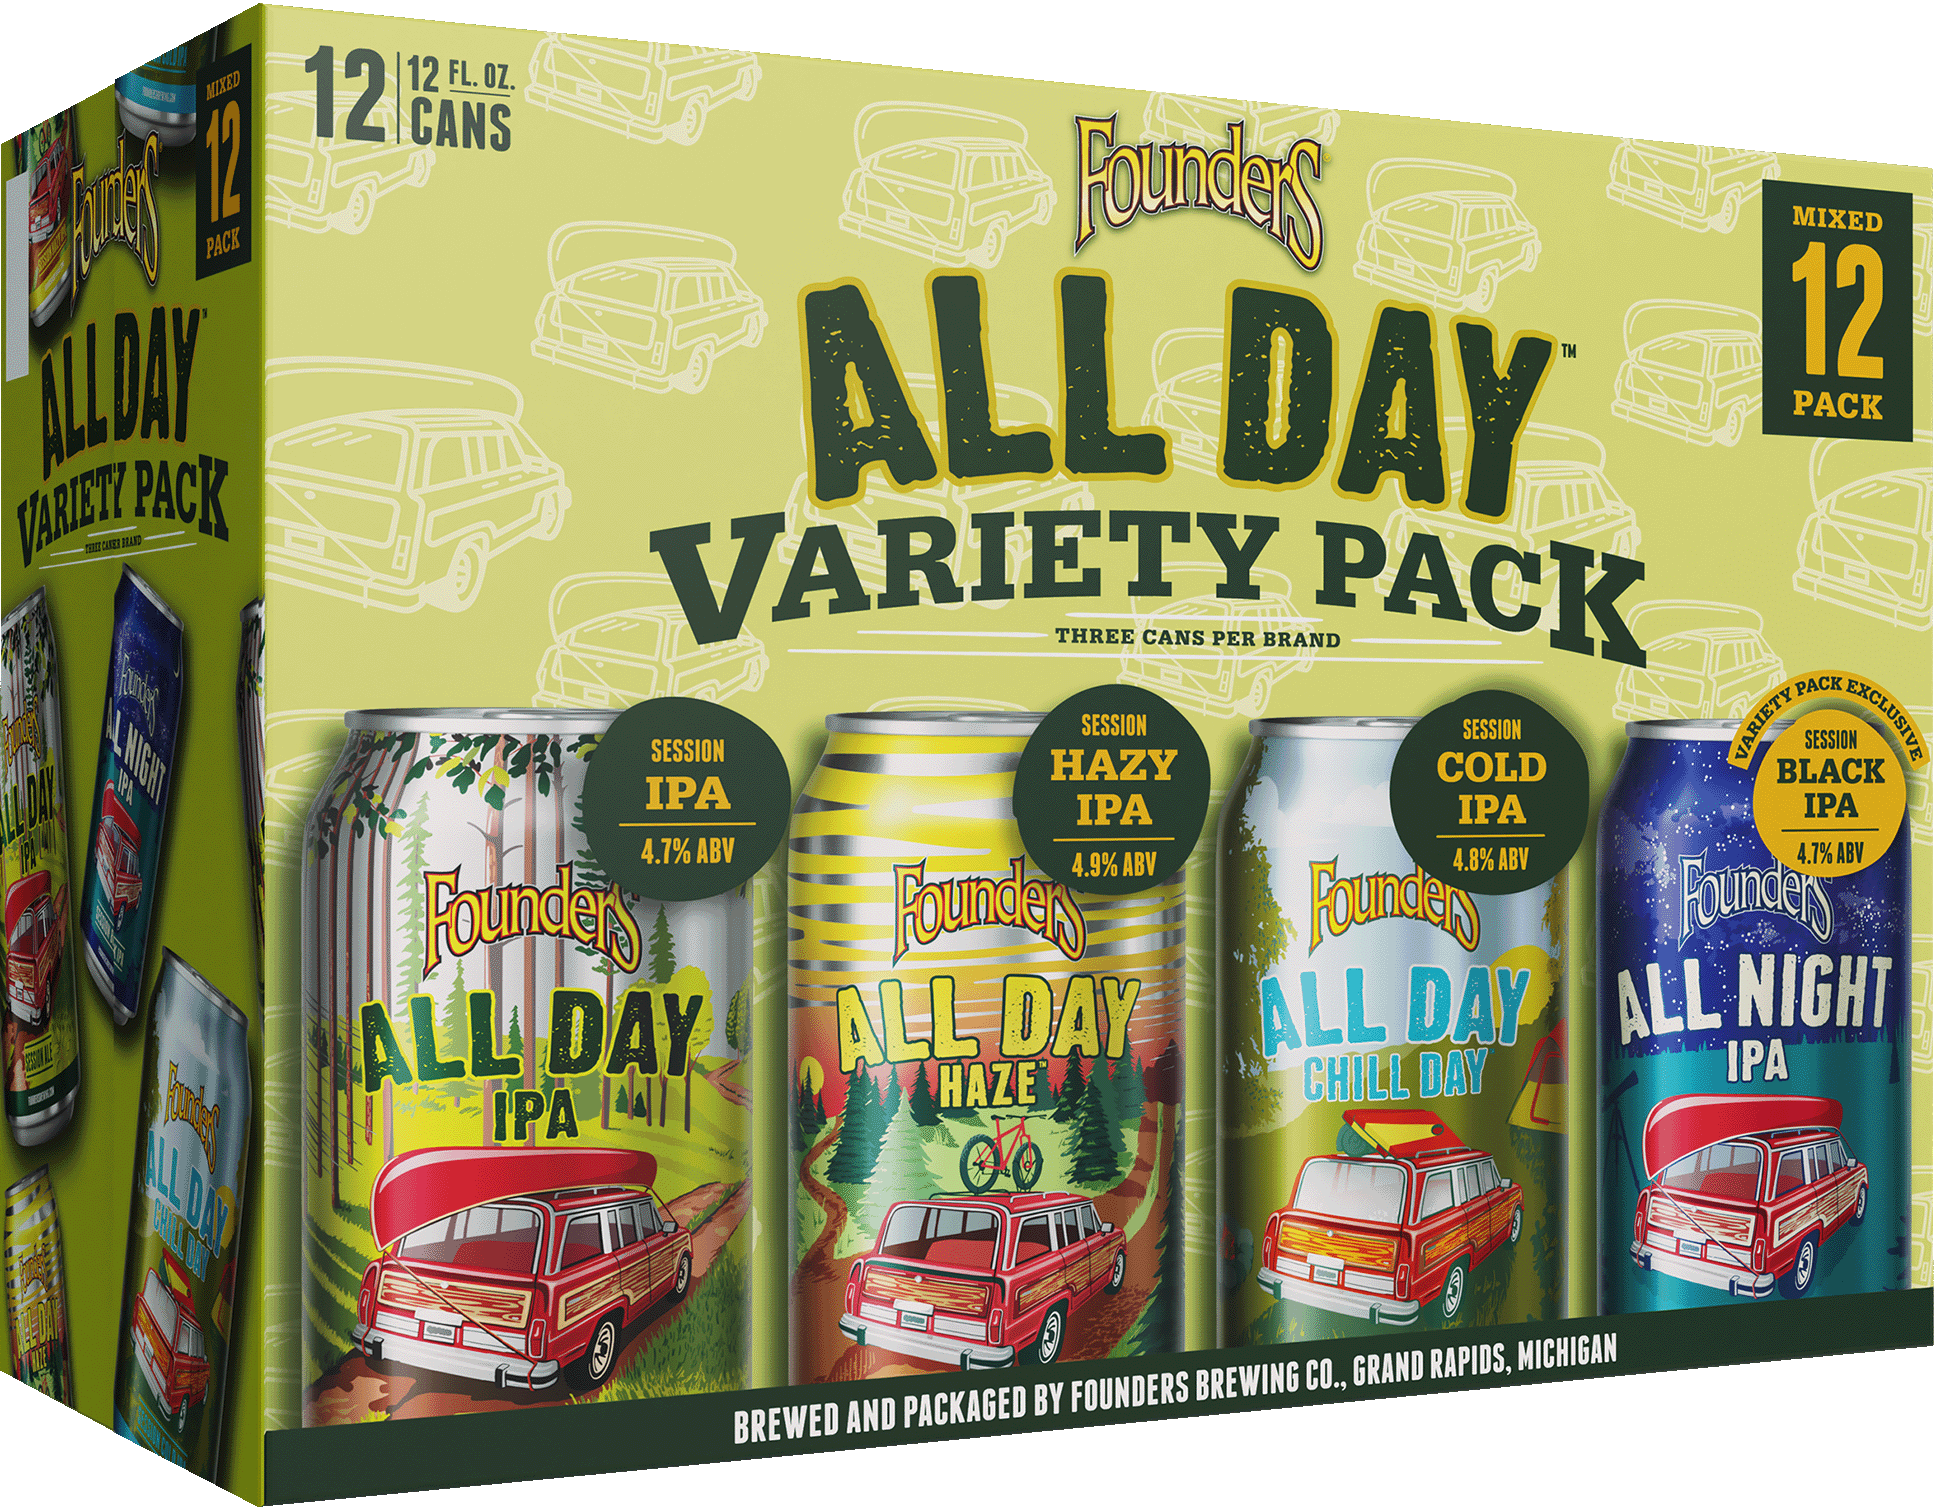 All Day IPA Variety Pack packaging